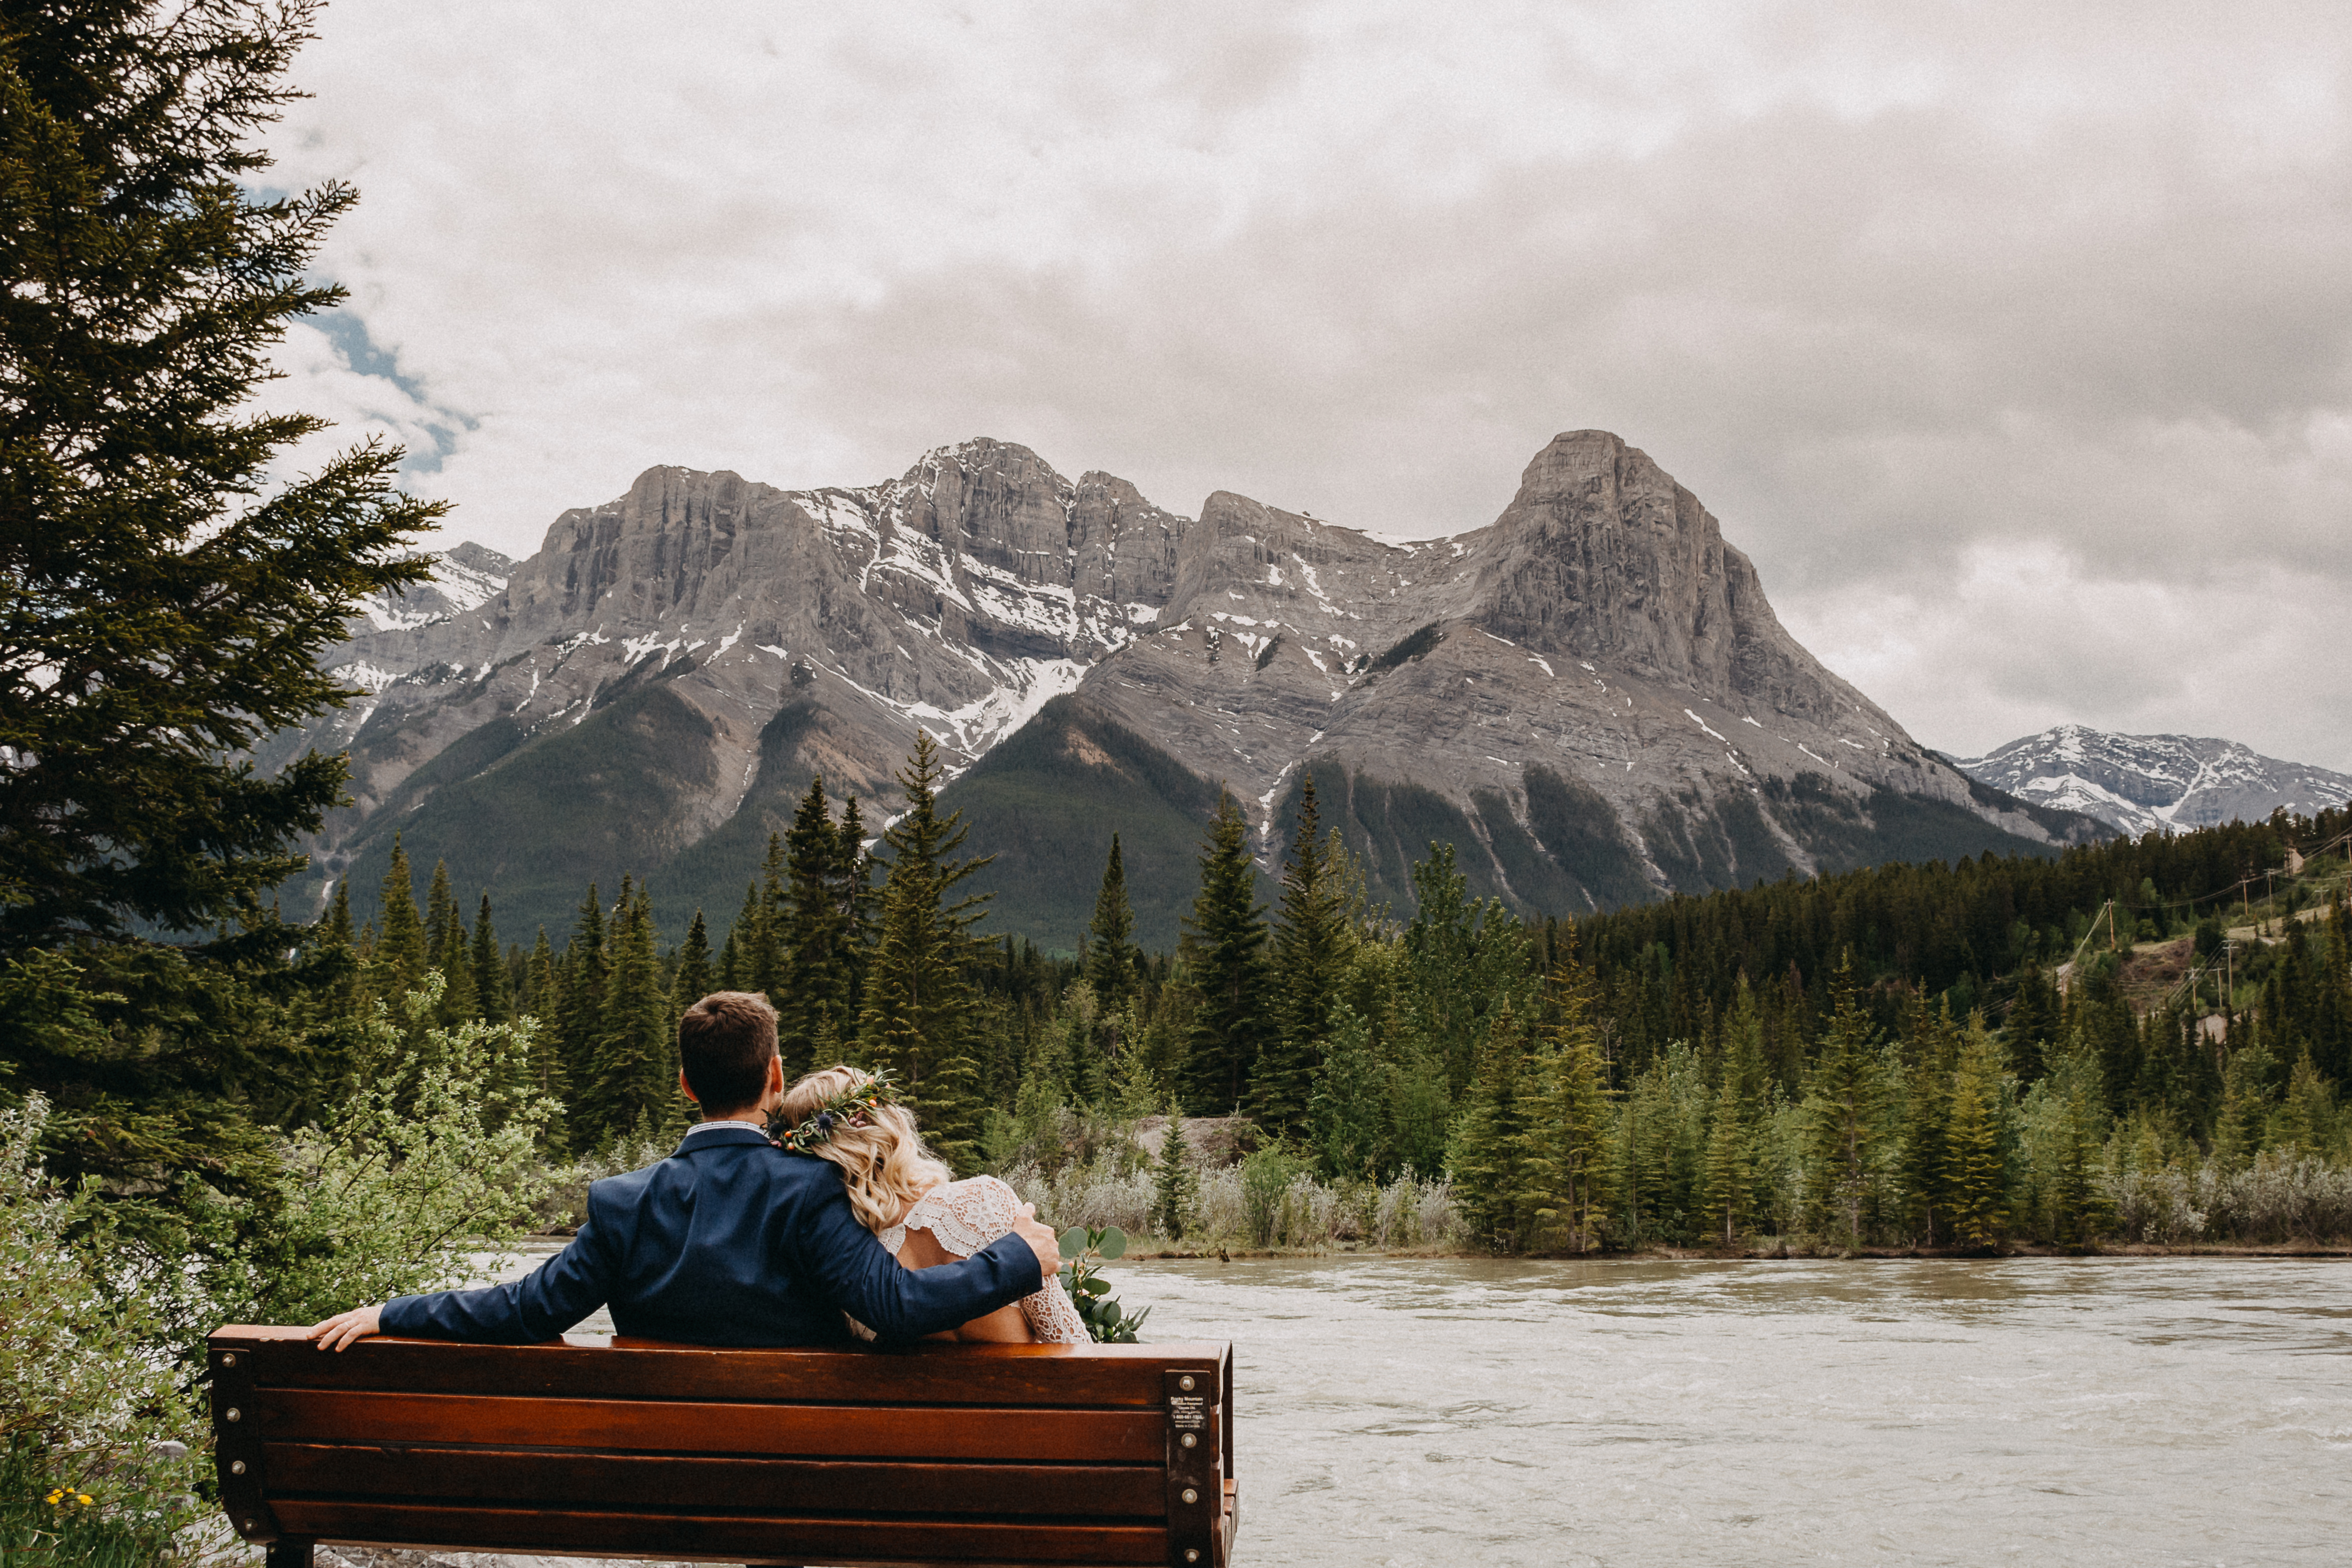 Groom and Bride sitting on bench in front of a river and a section of the rocky mountains